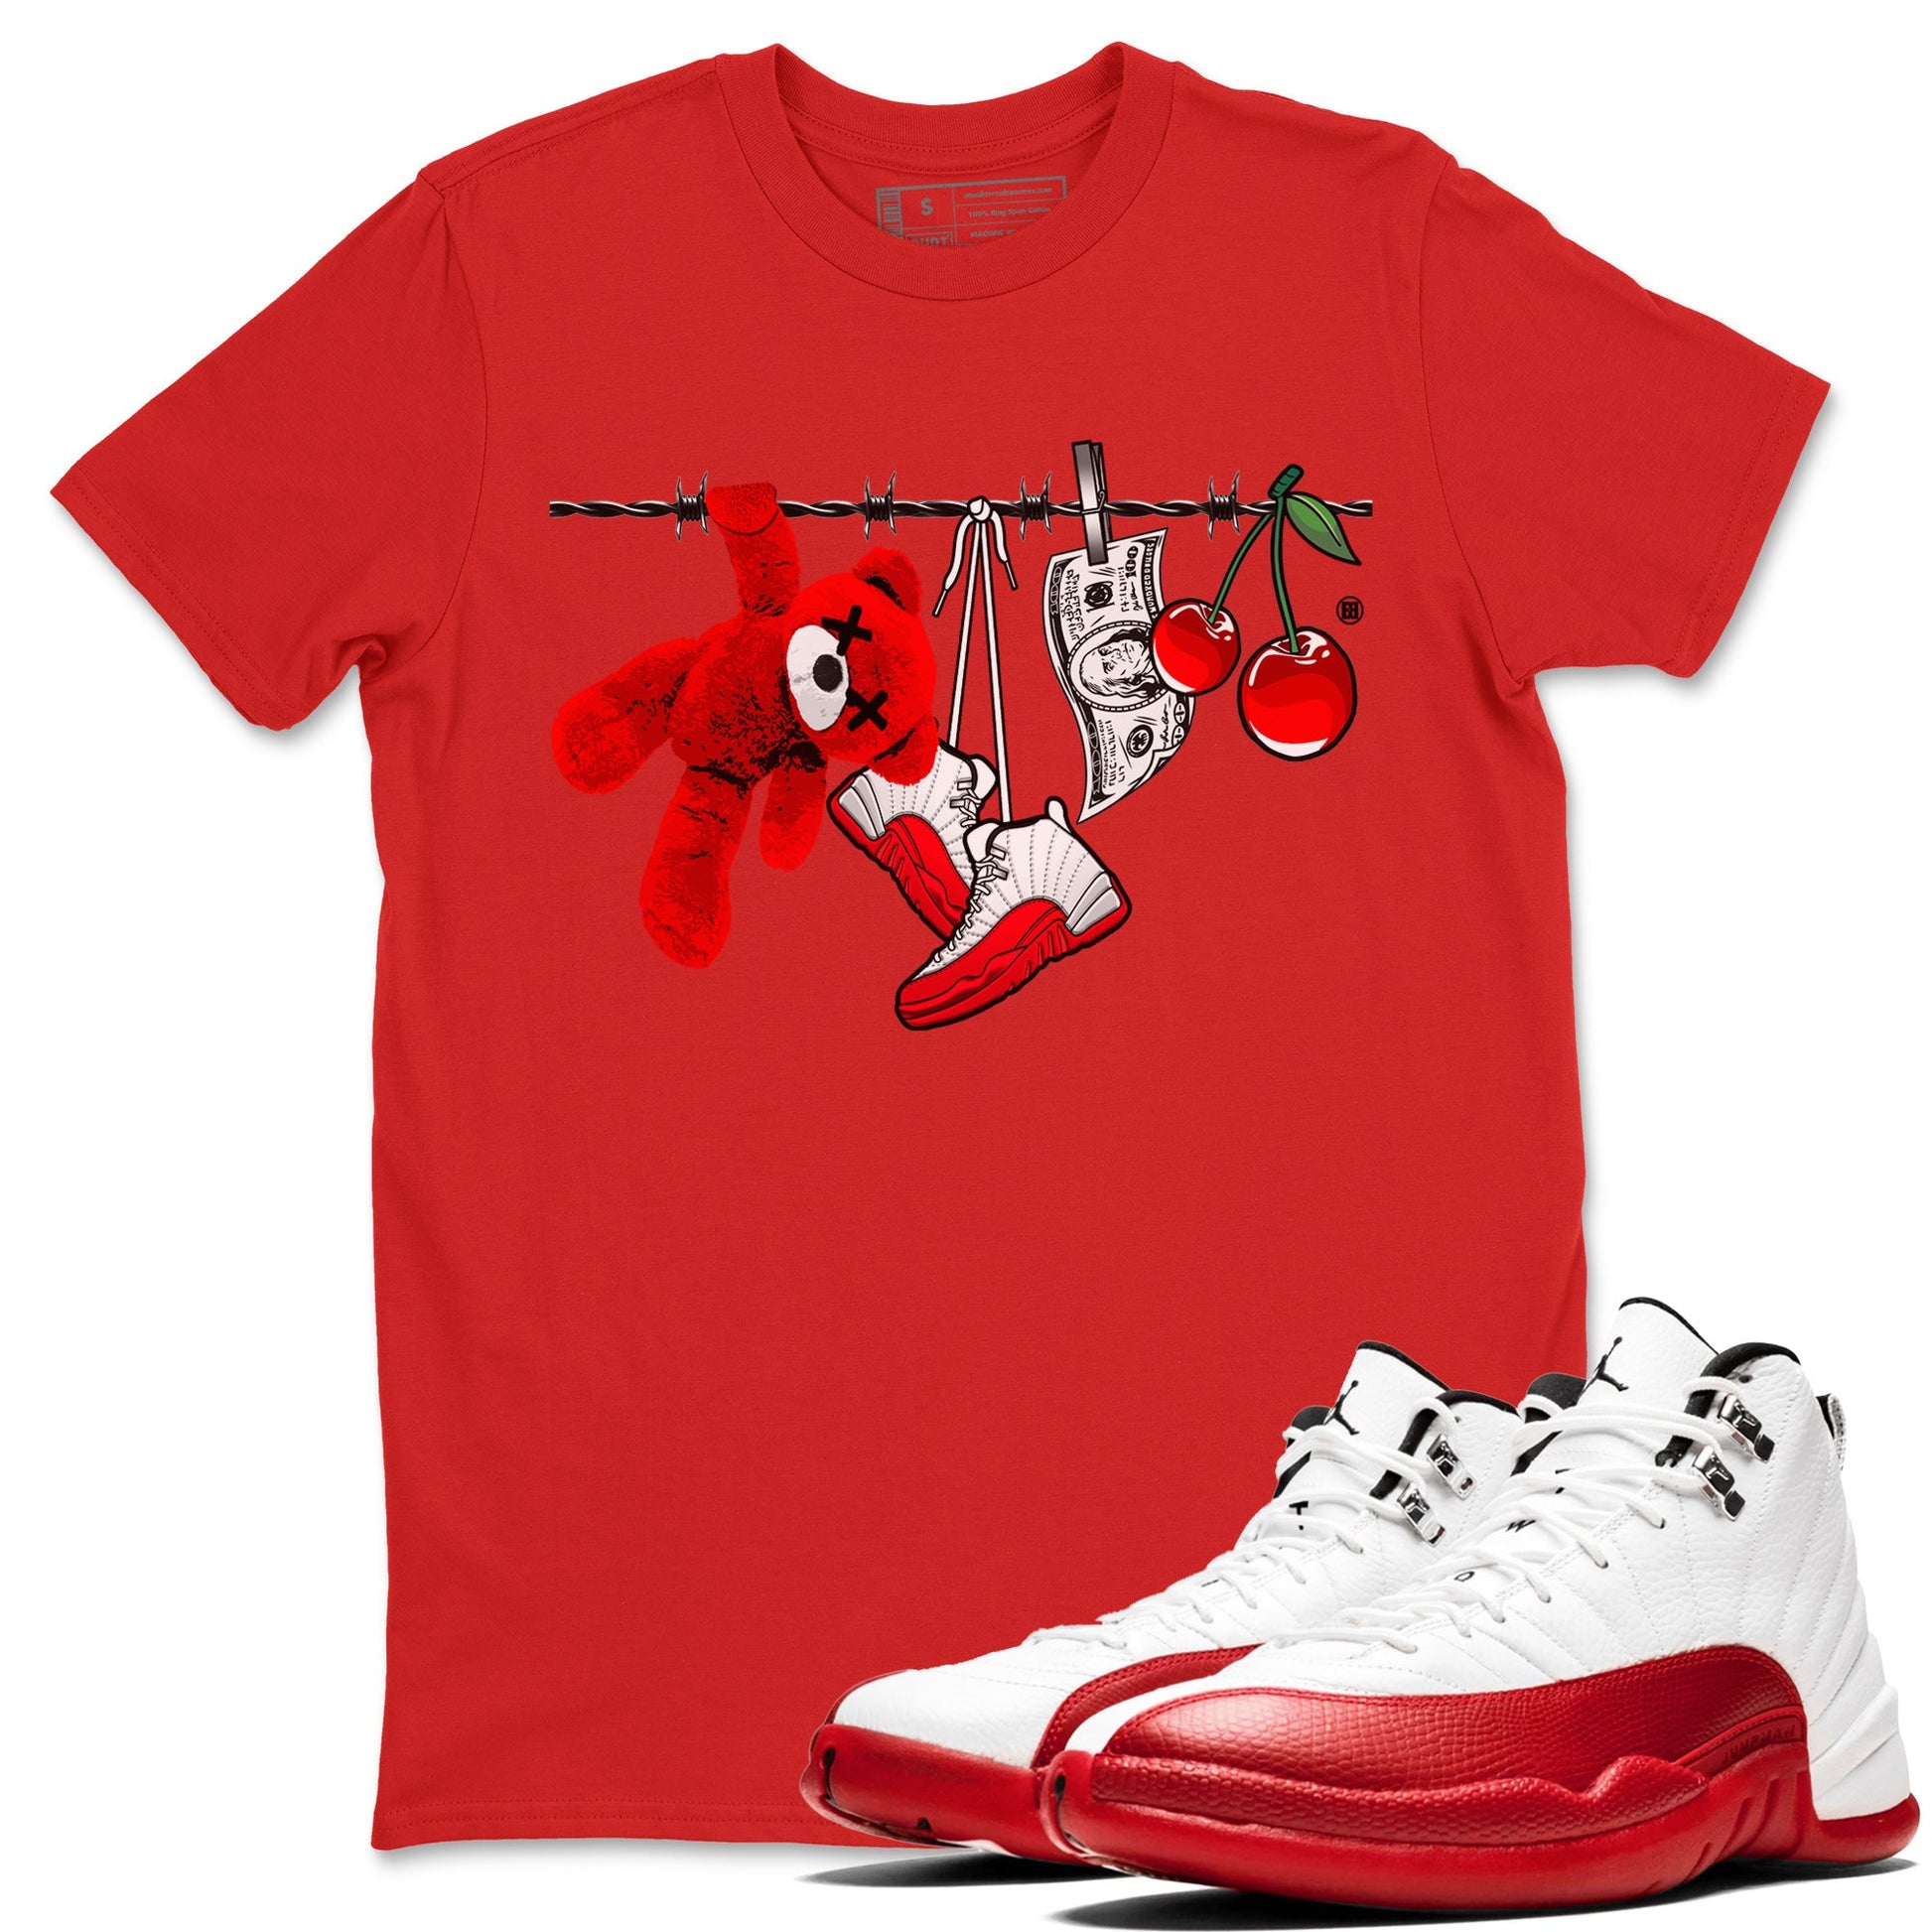 12s Cherry Sneaker Match Tees Clothesline Sneaker Tees Air Jordan 12 Cherry Sneaker Release Tees Unisex Shirts Red 1